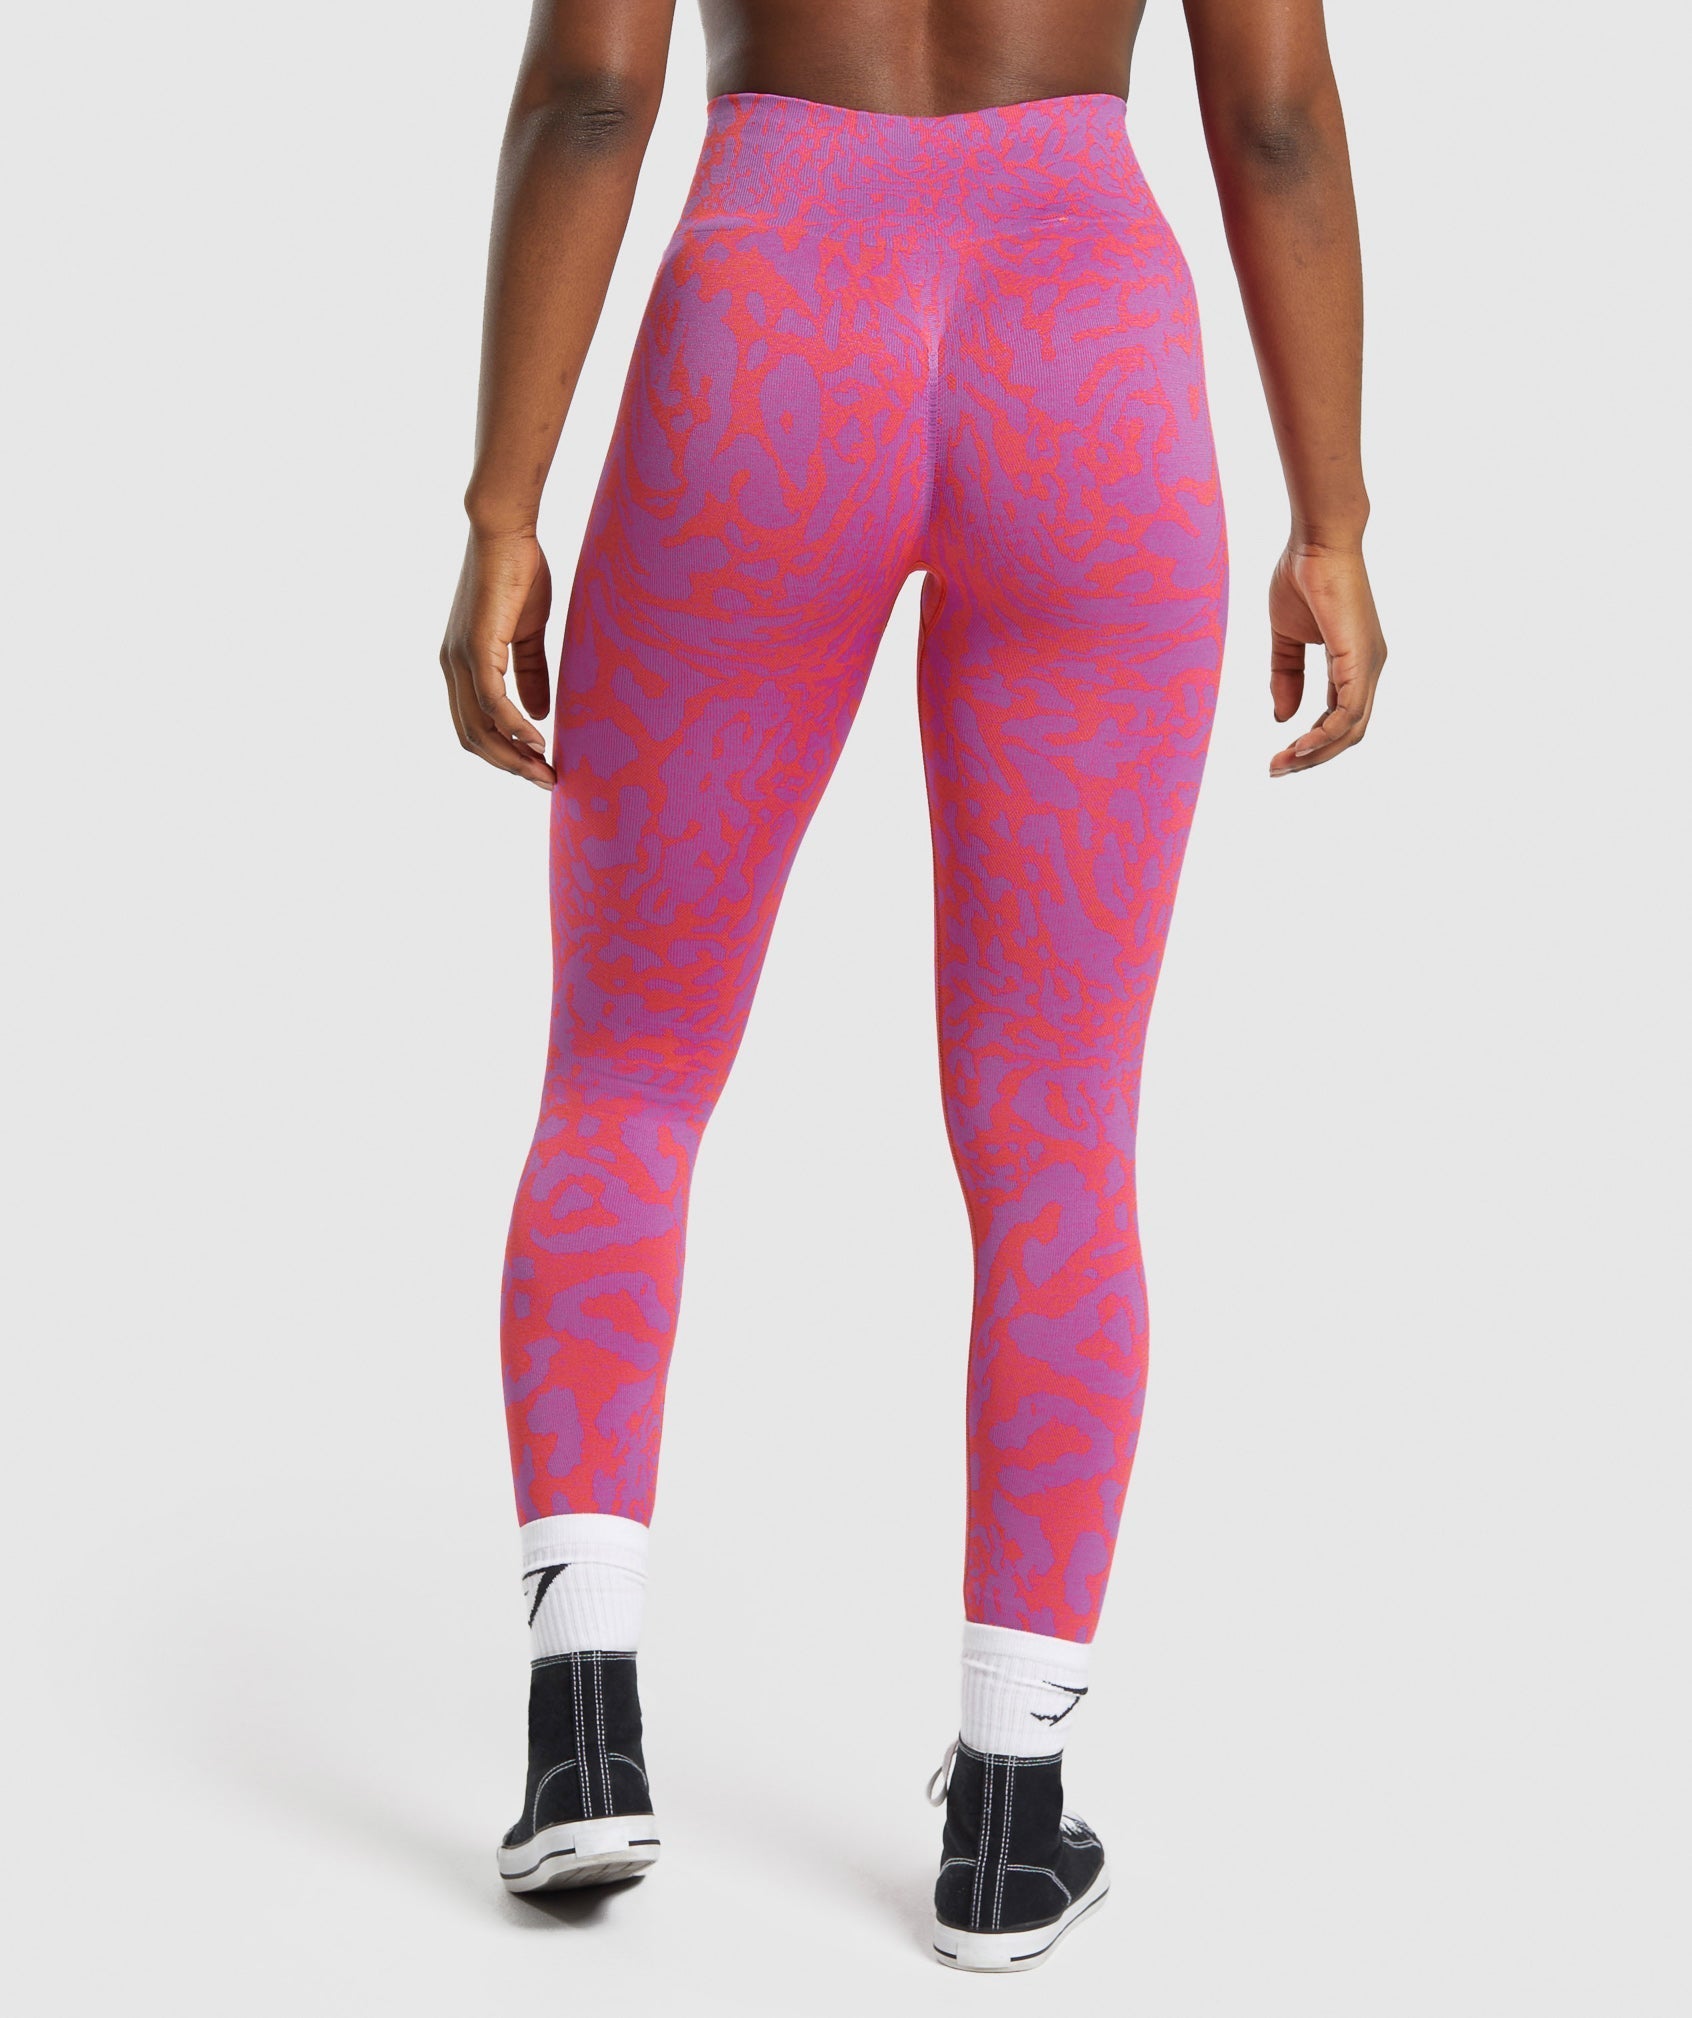 Adapt Safari Seamless Leggings in Shelly Pink/Fly Coral - view 2